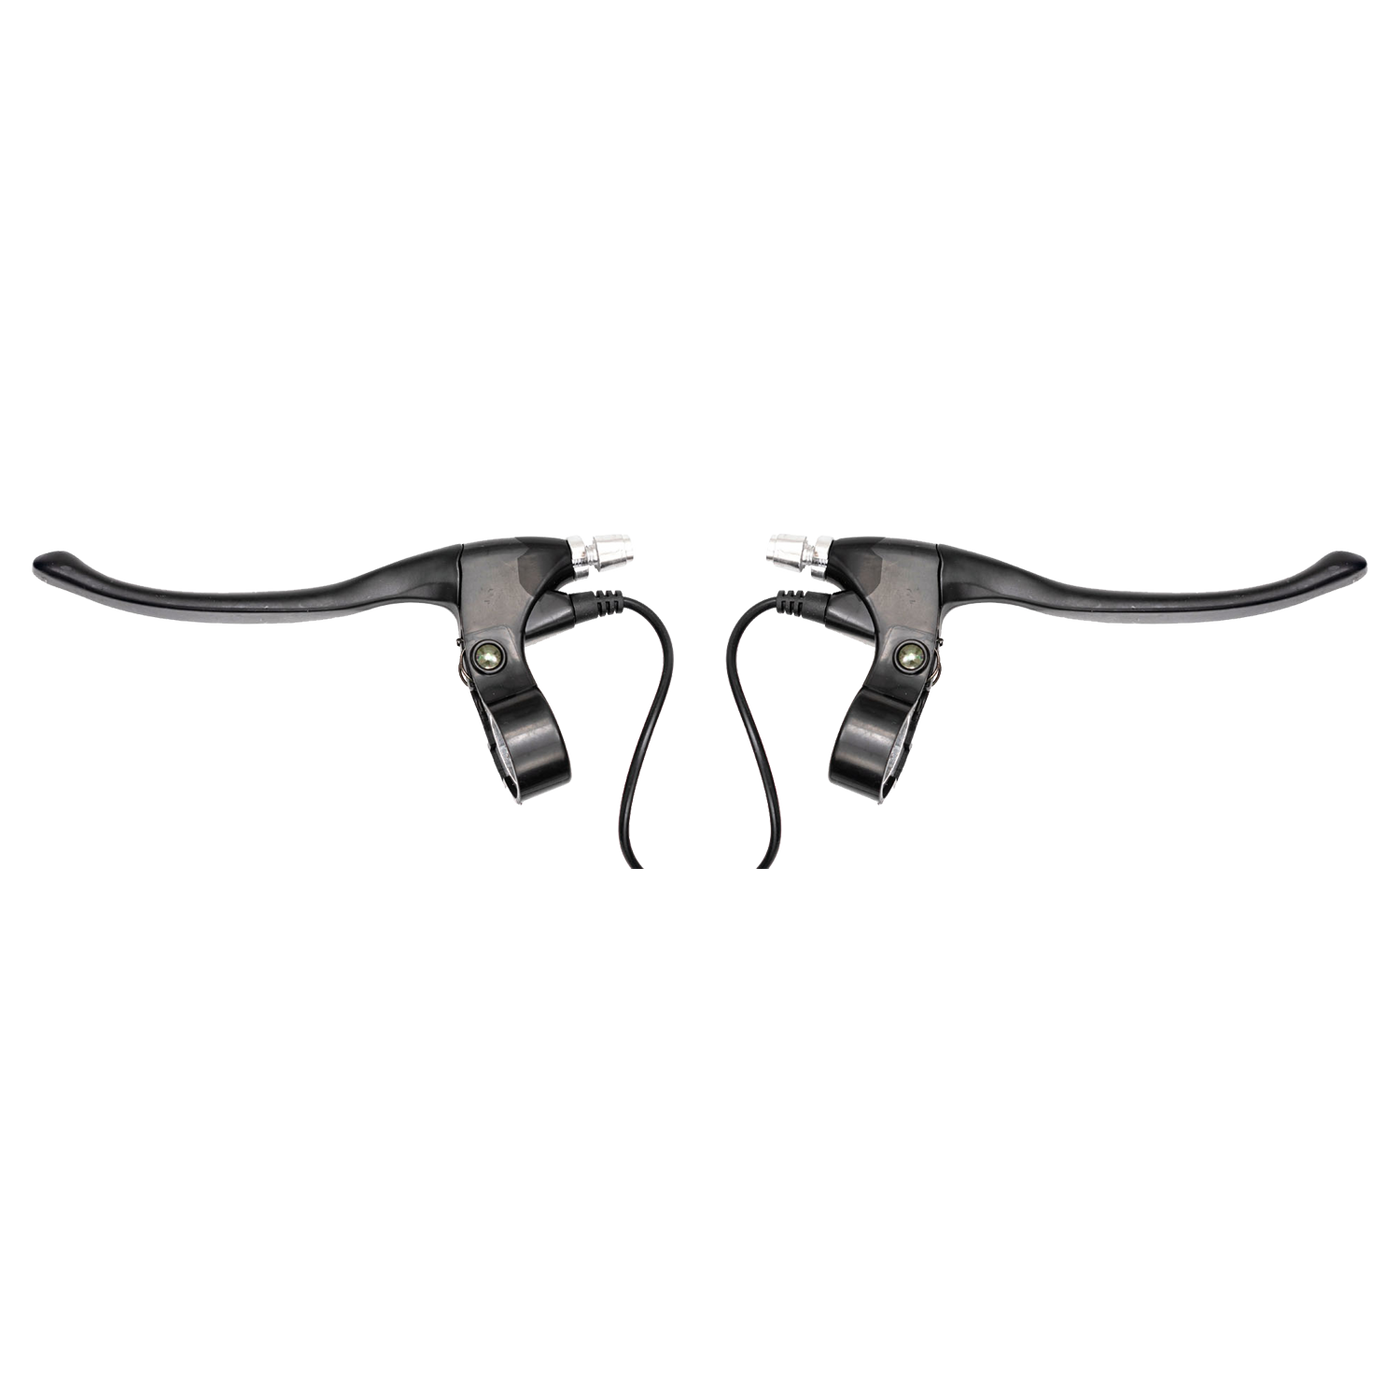 24V Brake Levers with Auto Cutoff for Geekay PMDC Side Motor Kit 24V Brake Levers with Auto Cutoff for Geekay PMDC Side Motor Kit 